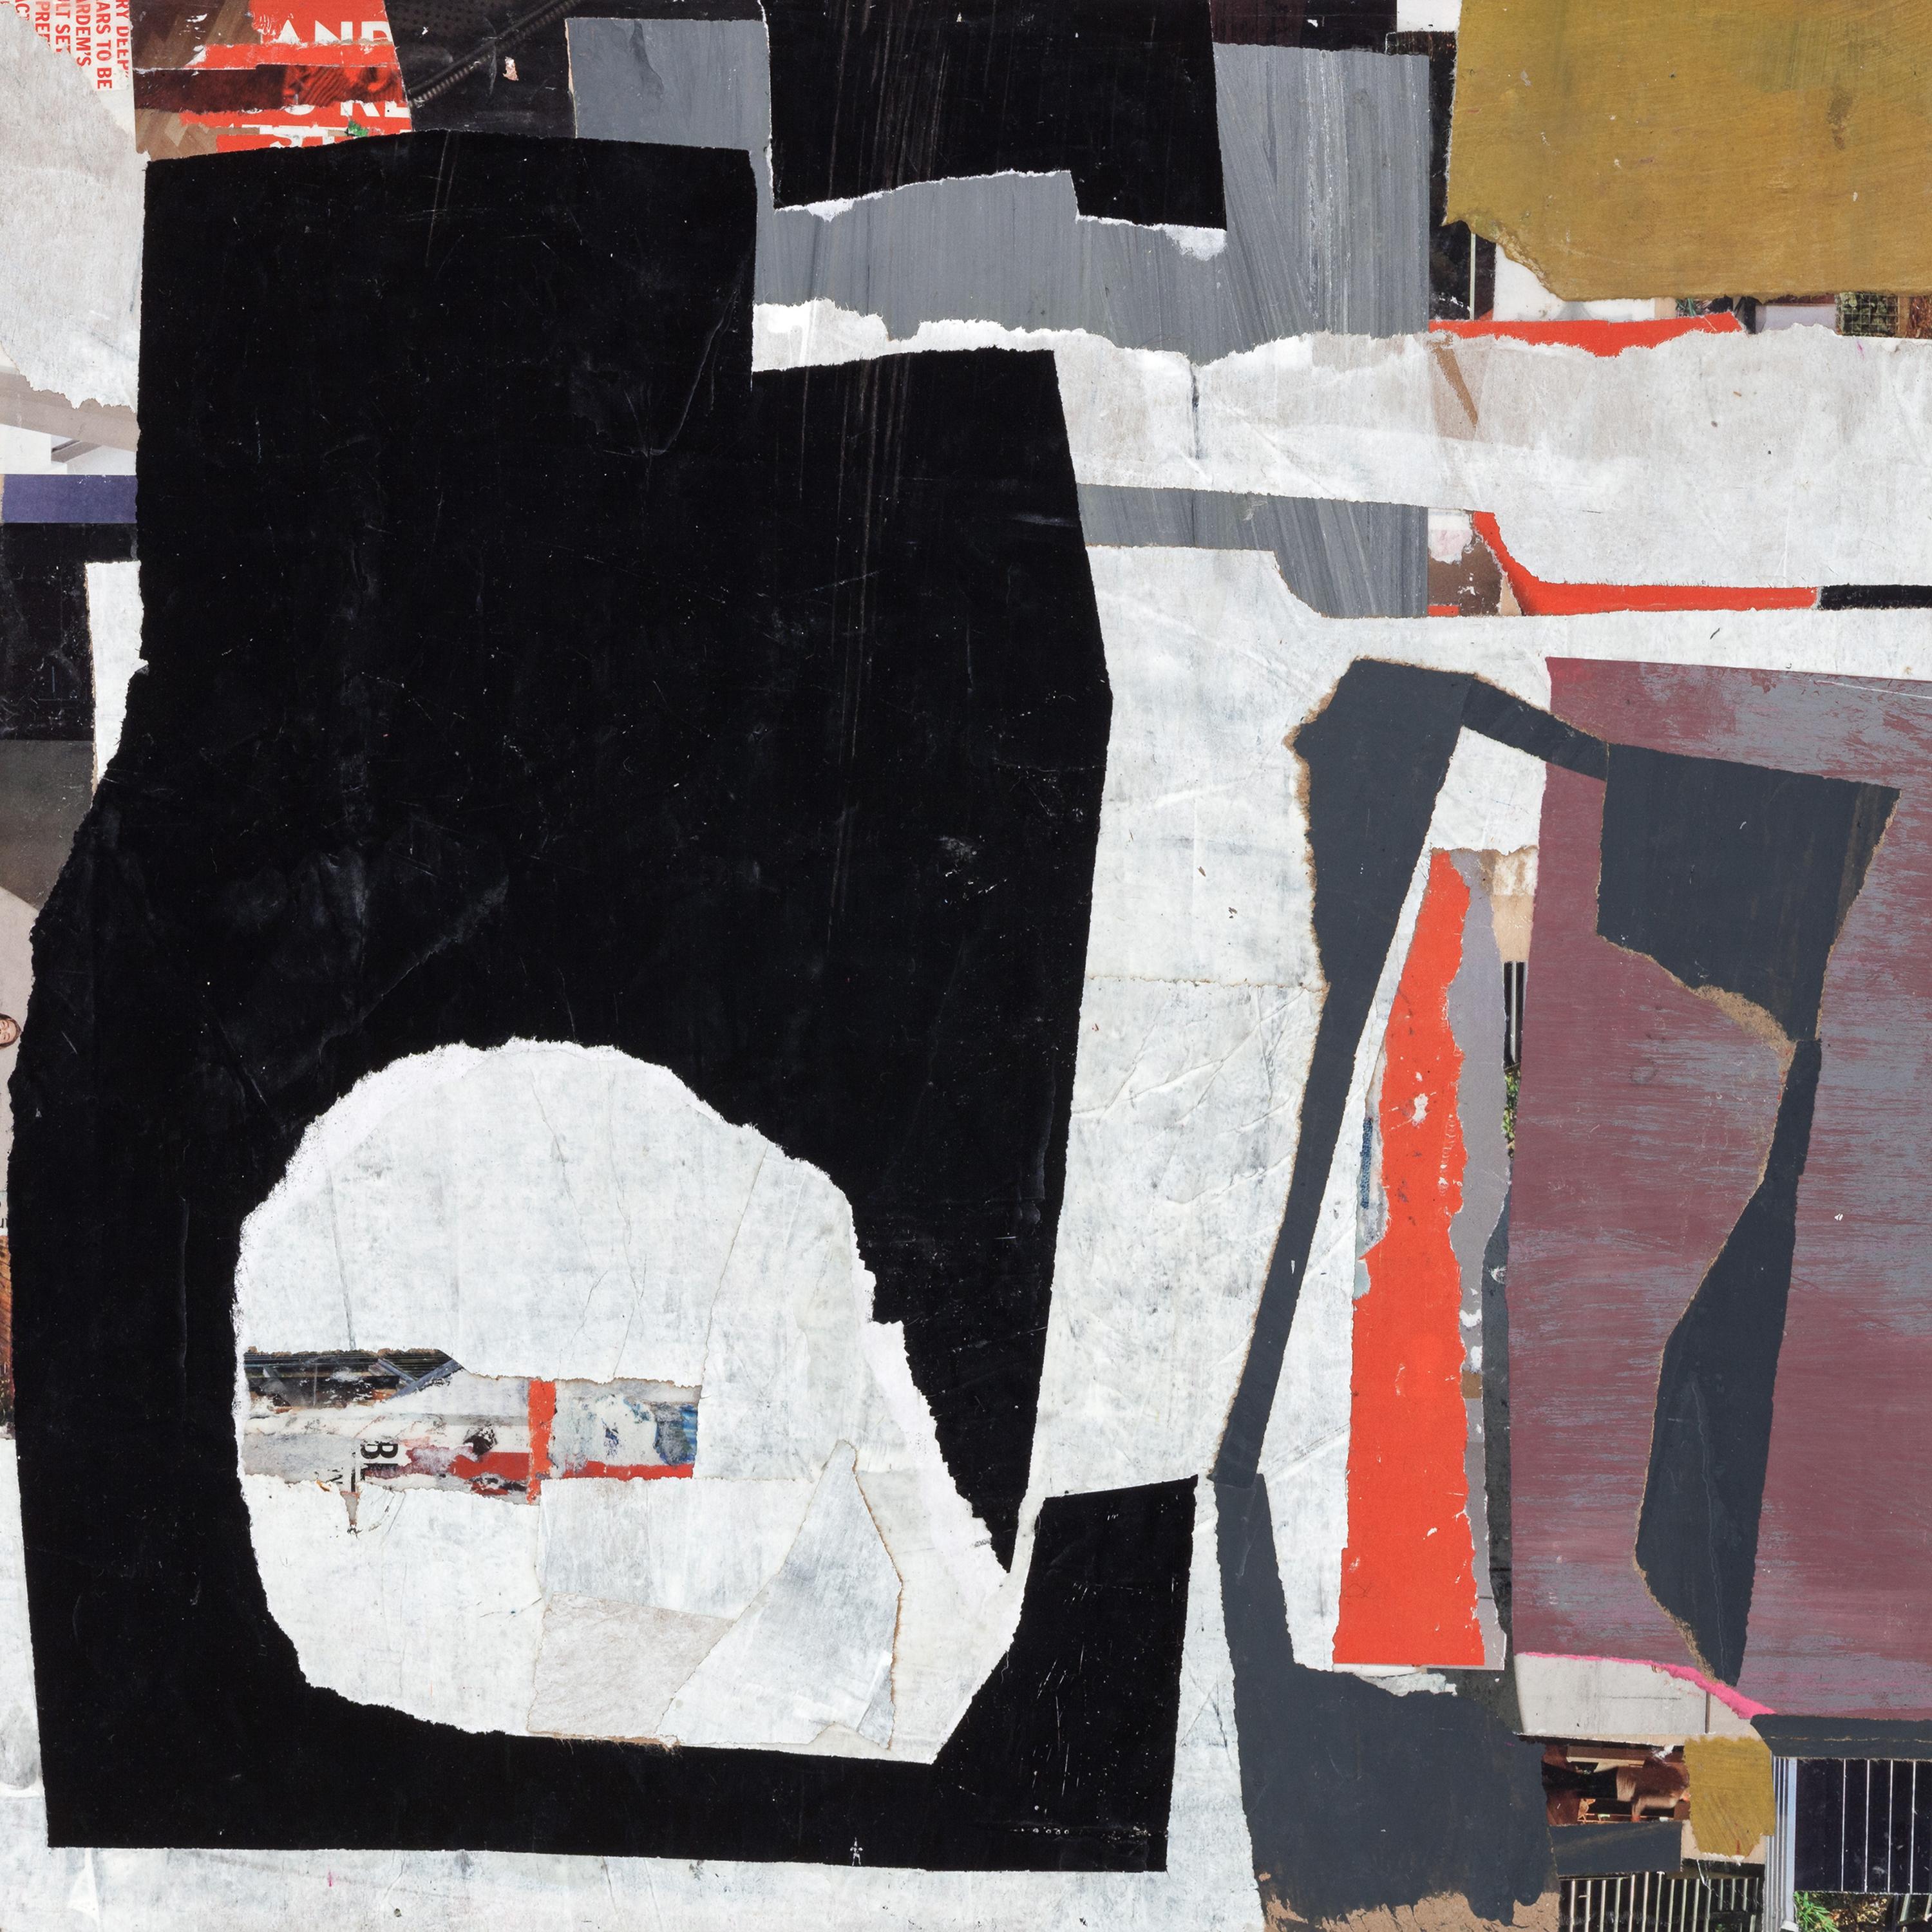 "The Space Between" - Non-Objective Paper Collage - Diebenkorn - Mixed Media Art by Aimée Farnet Siegel